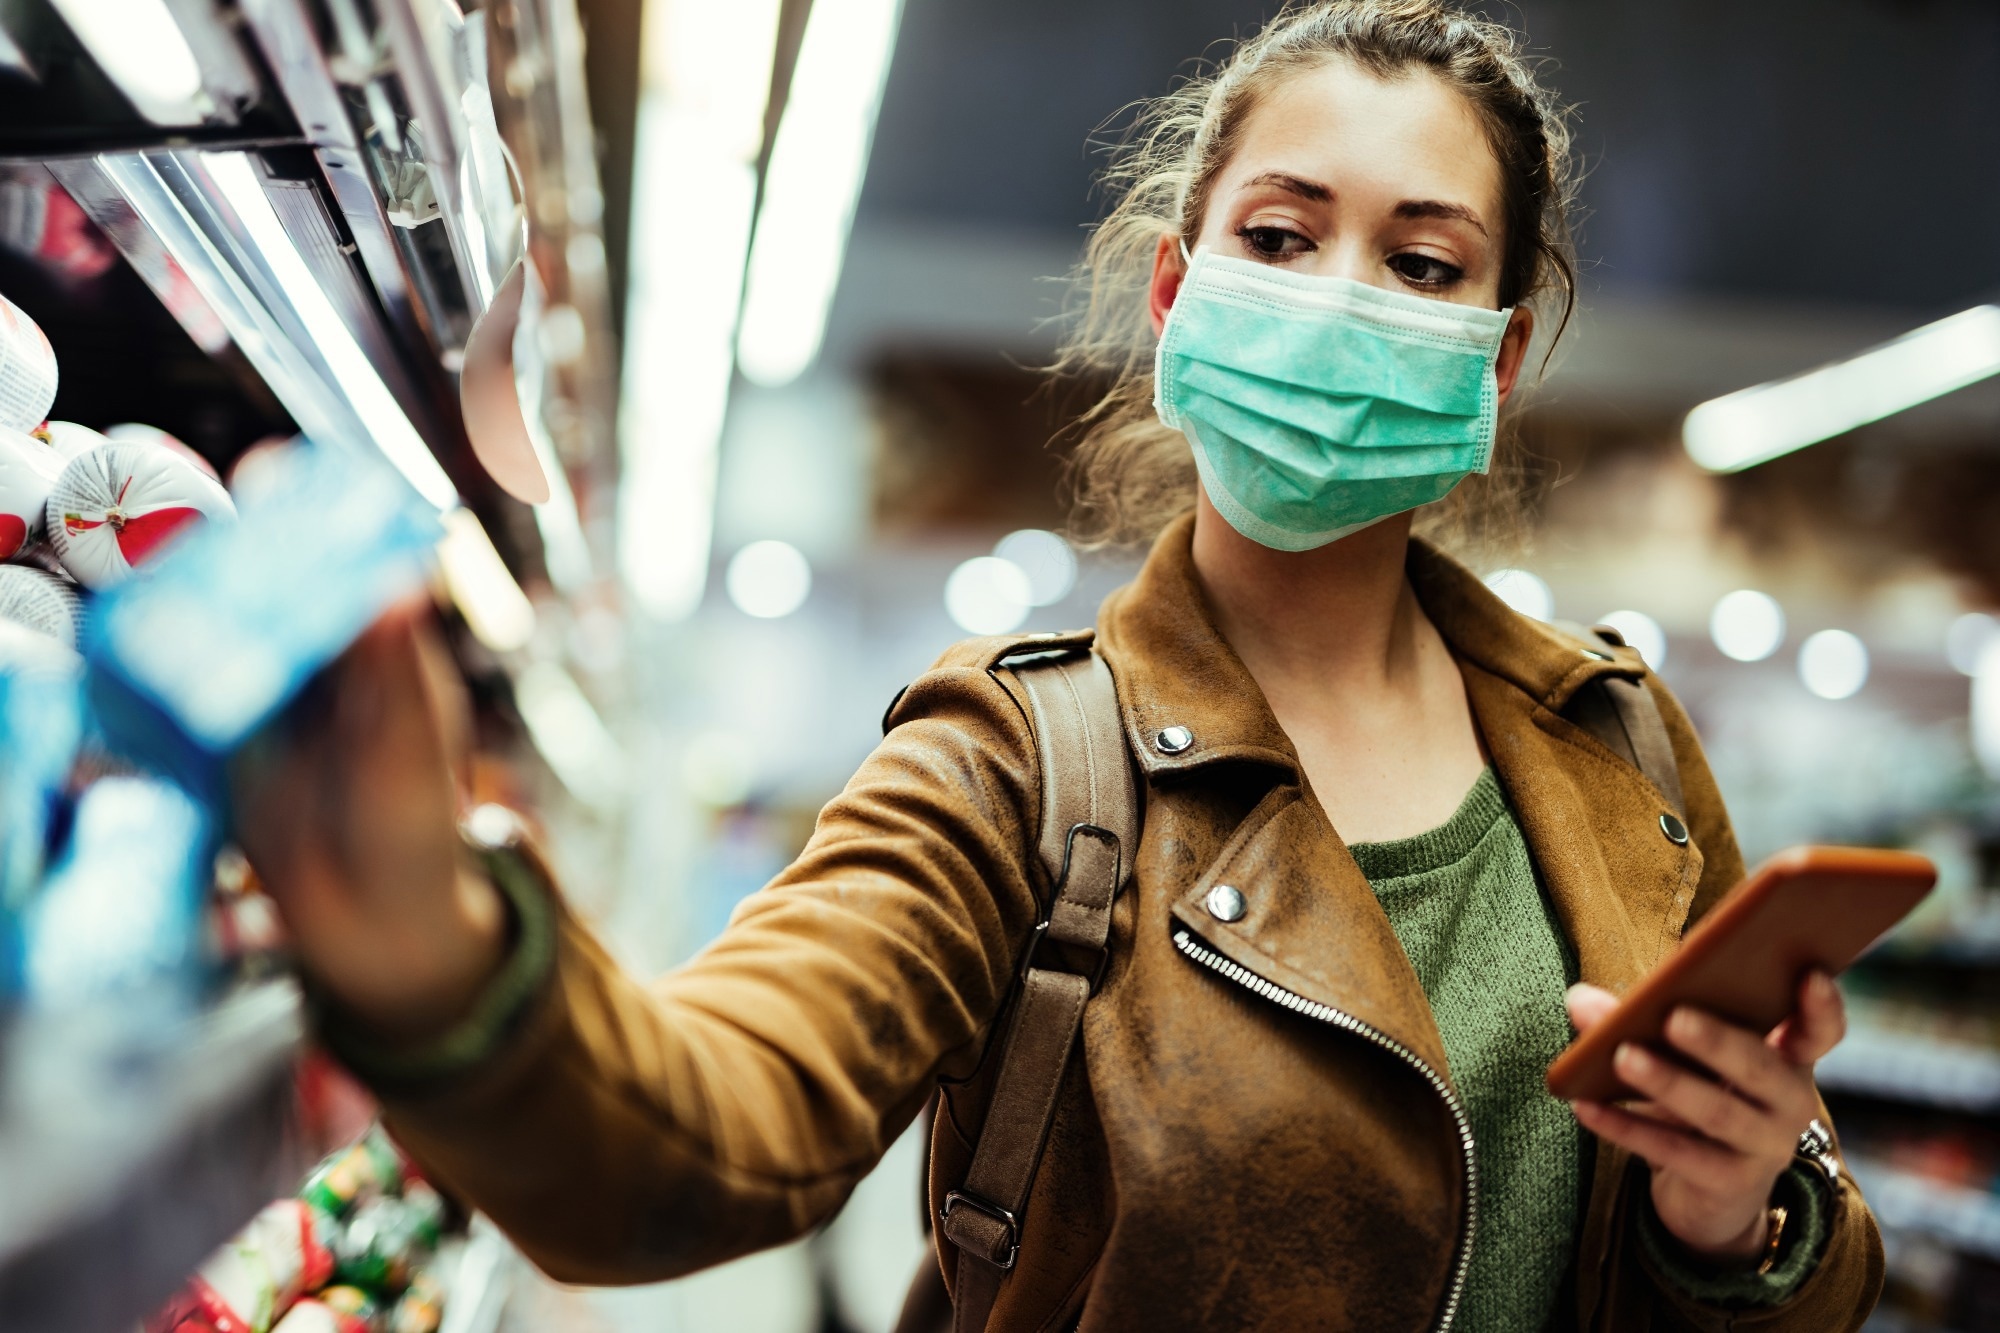 Study: Getting to the Truth About the Effectiveness of Masks in Preventing COVID-19. Image Credit: DrazenZigic/Shutterstock.com